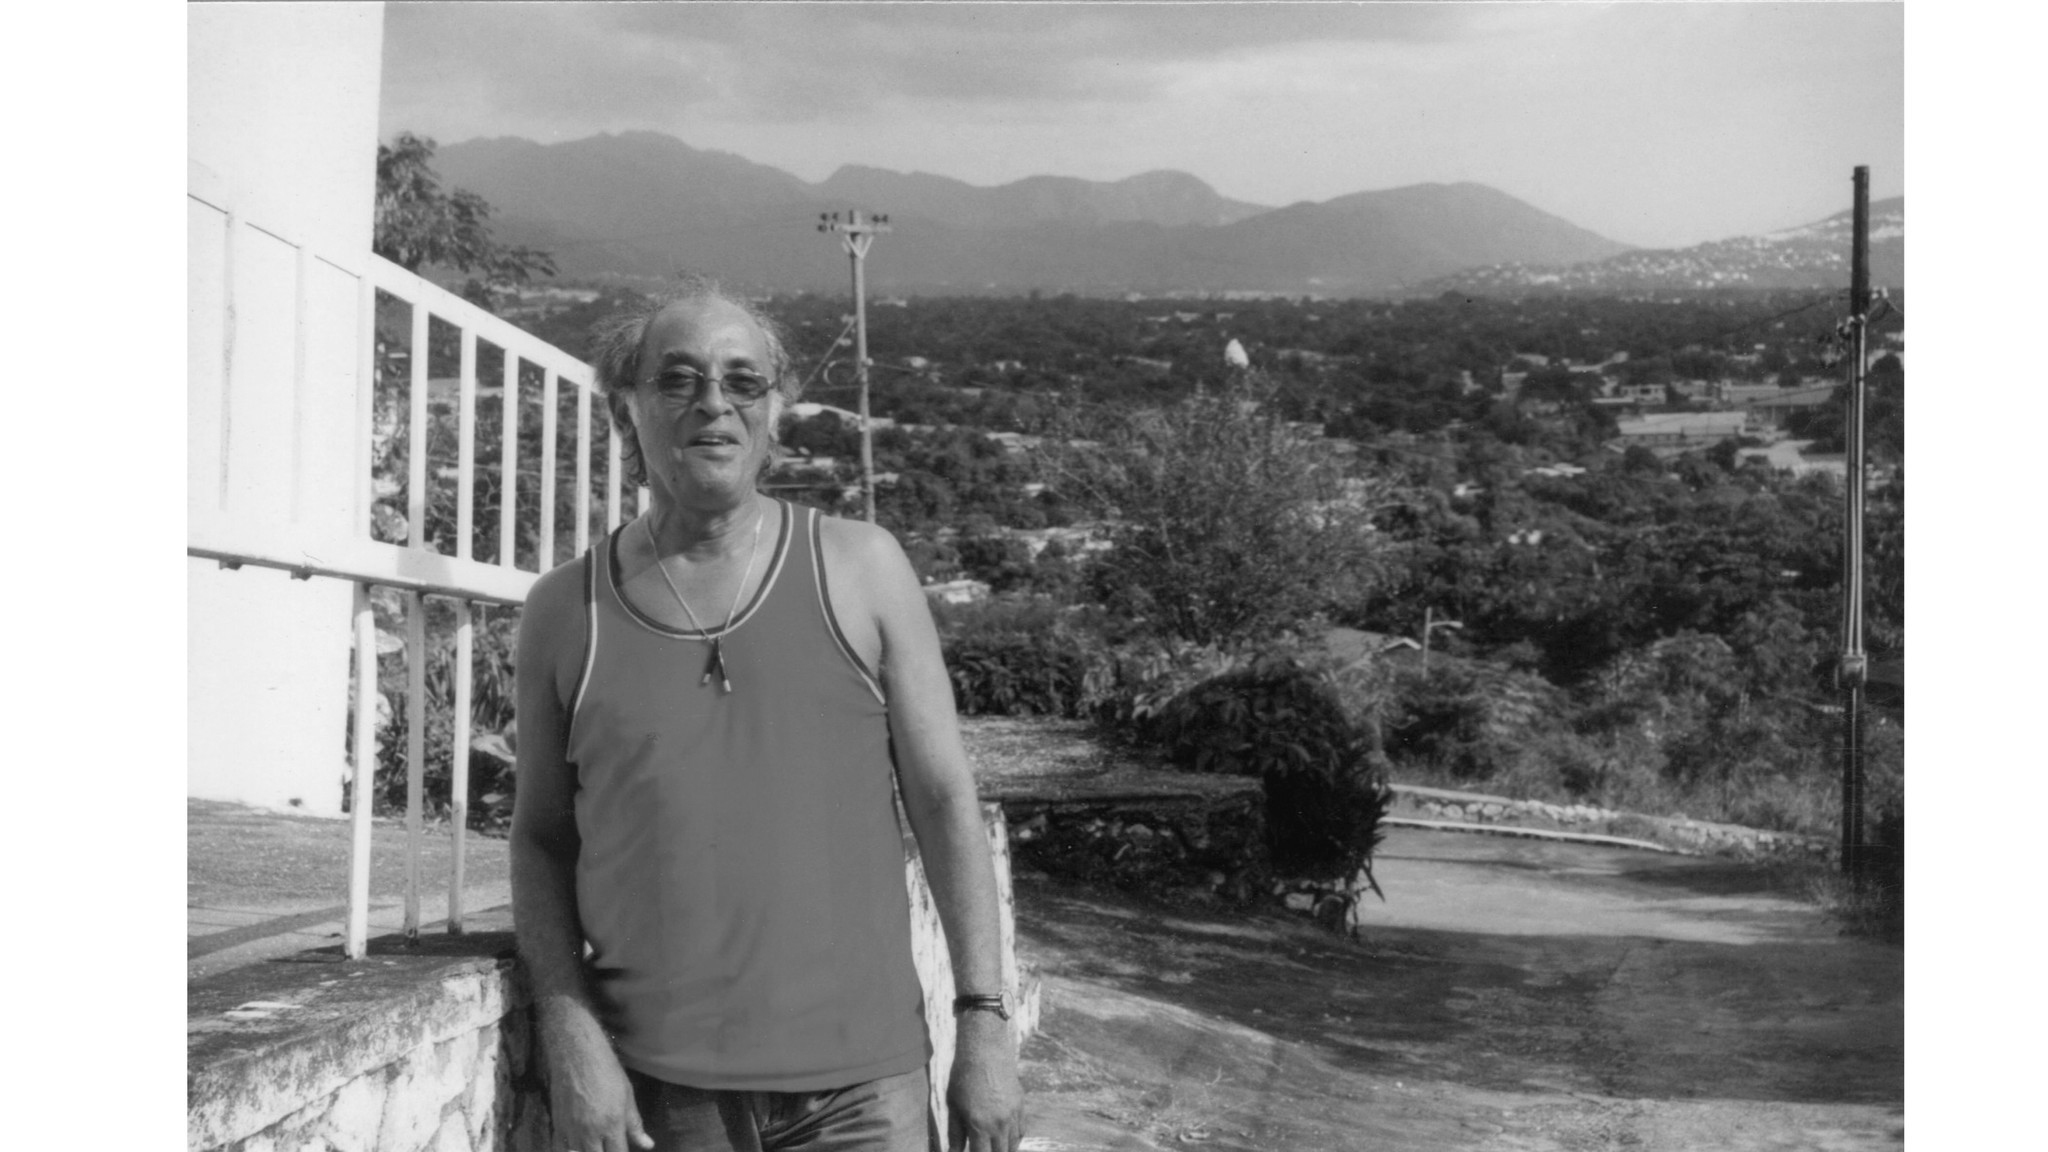 Jamaican Broadcaster Neville Willoughby in the hills above Kingston in 2003.